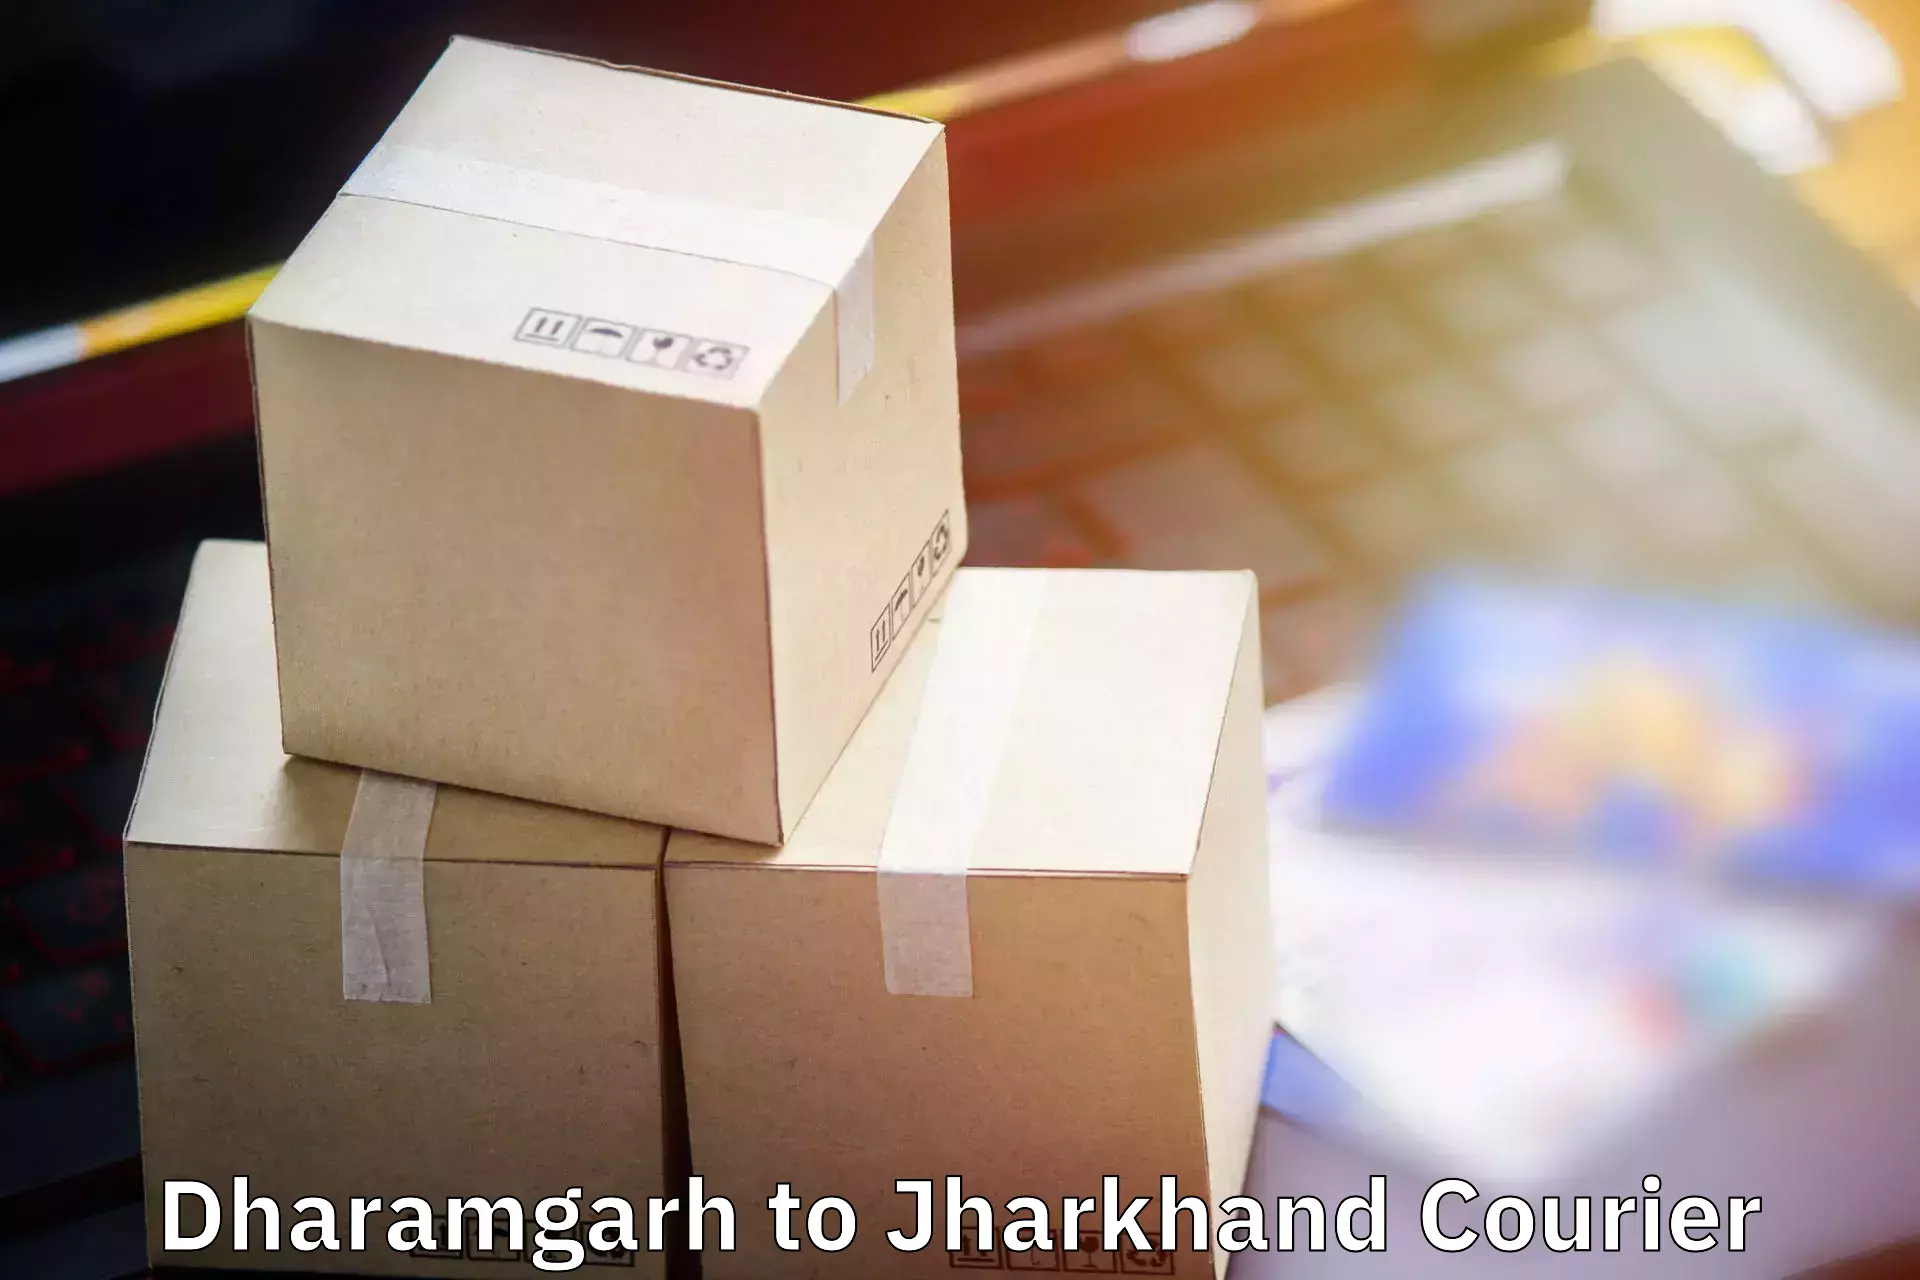 Luggage transfer service Dharamgarh to Jharkhand